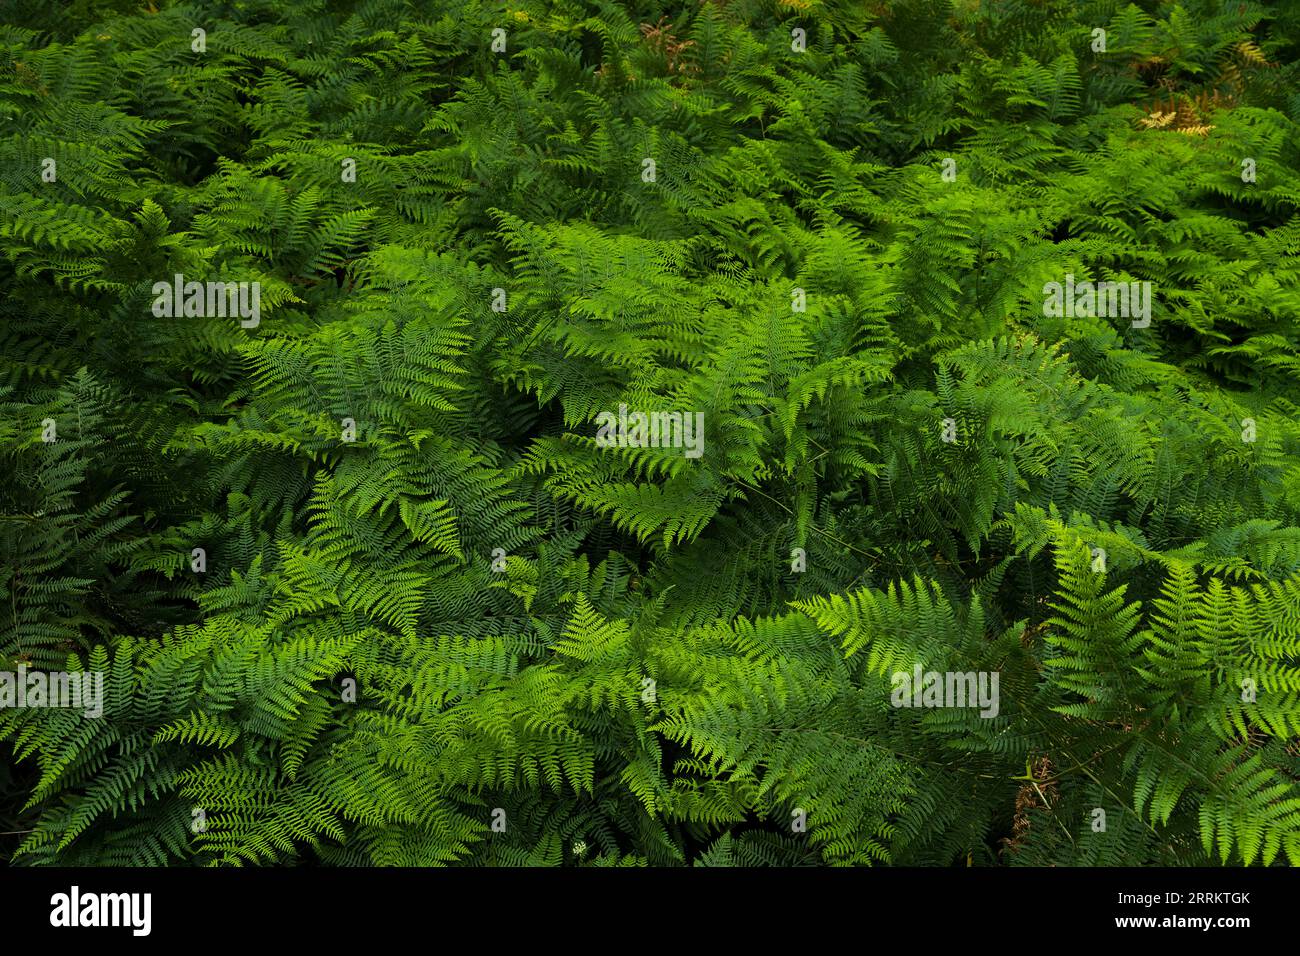 Eagle fern (Pteridium aquilinum) covers the forest floor in the Palatinate Forest Nature Park, Palatinate Forest-North Vosges Biosphere Reserve, Germany, Rhineland-Palatinate Stock Photo